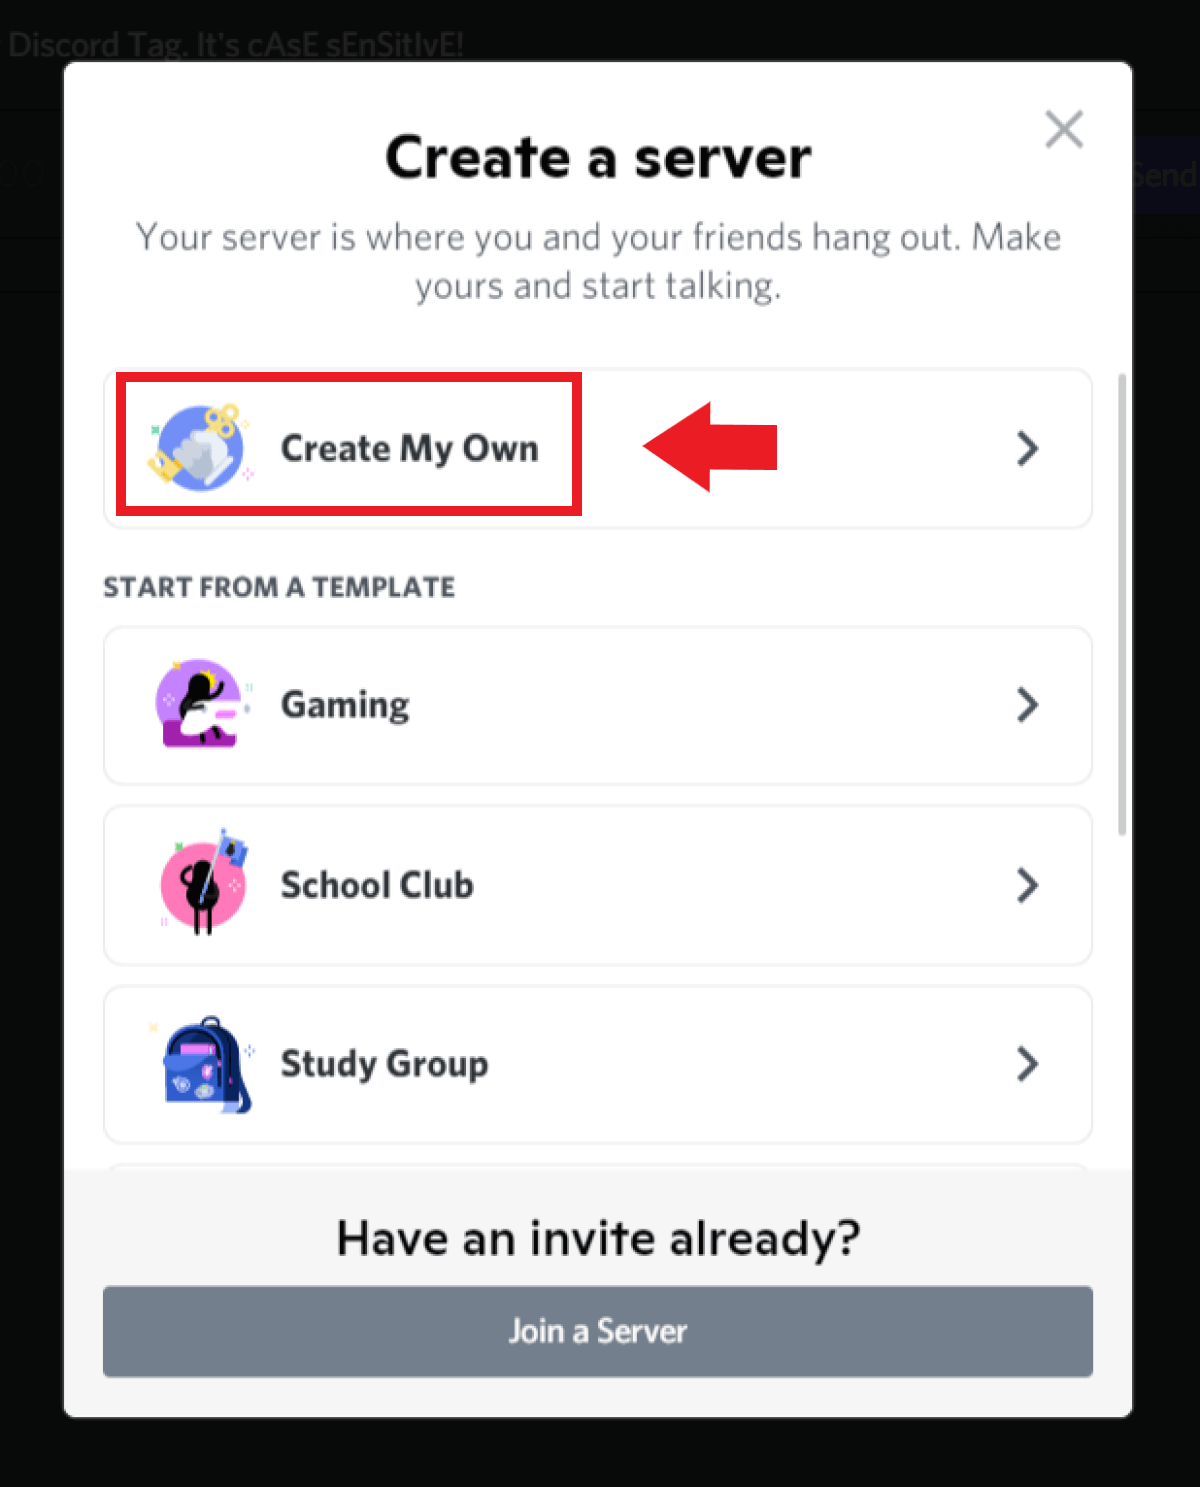 How to Make a Discord Server and Customize It